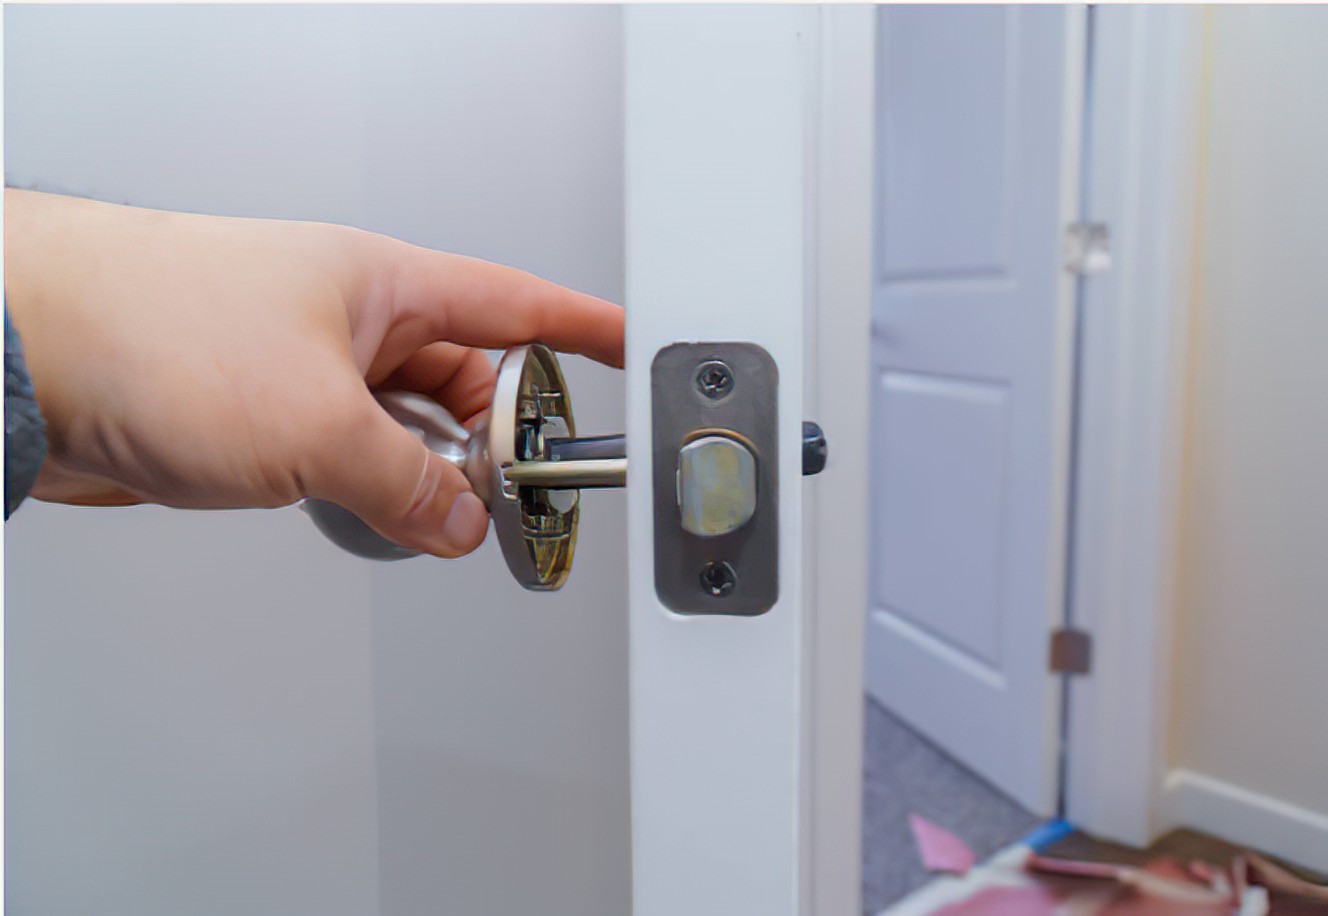 rekeying your locks - Lock Installation: A Step-by-Step Guide